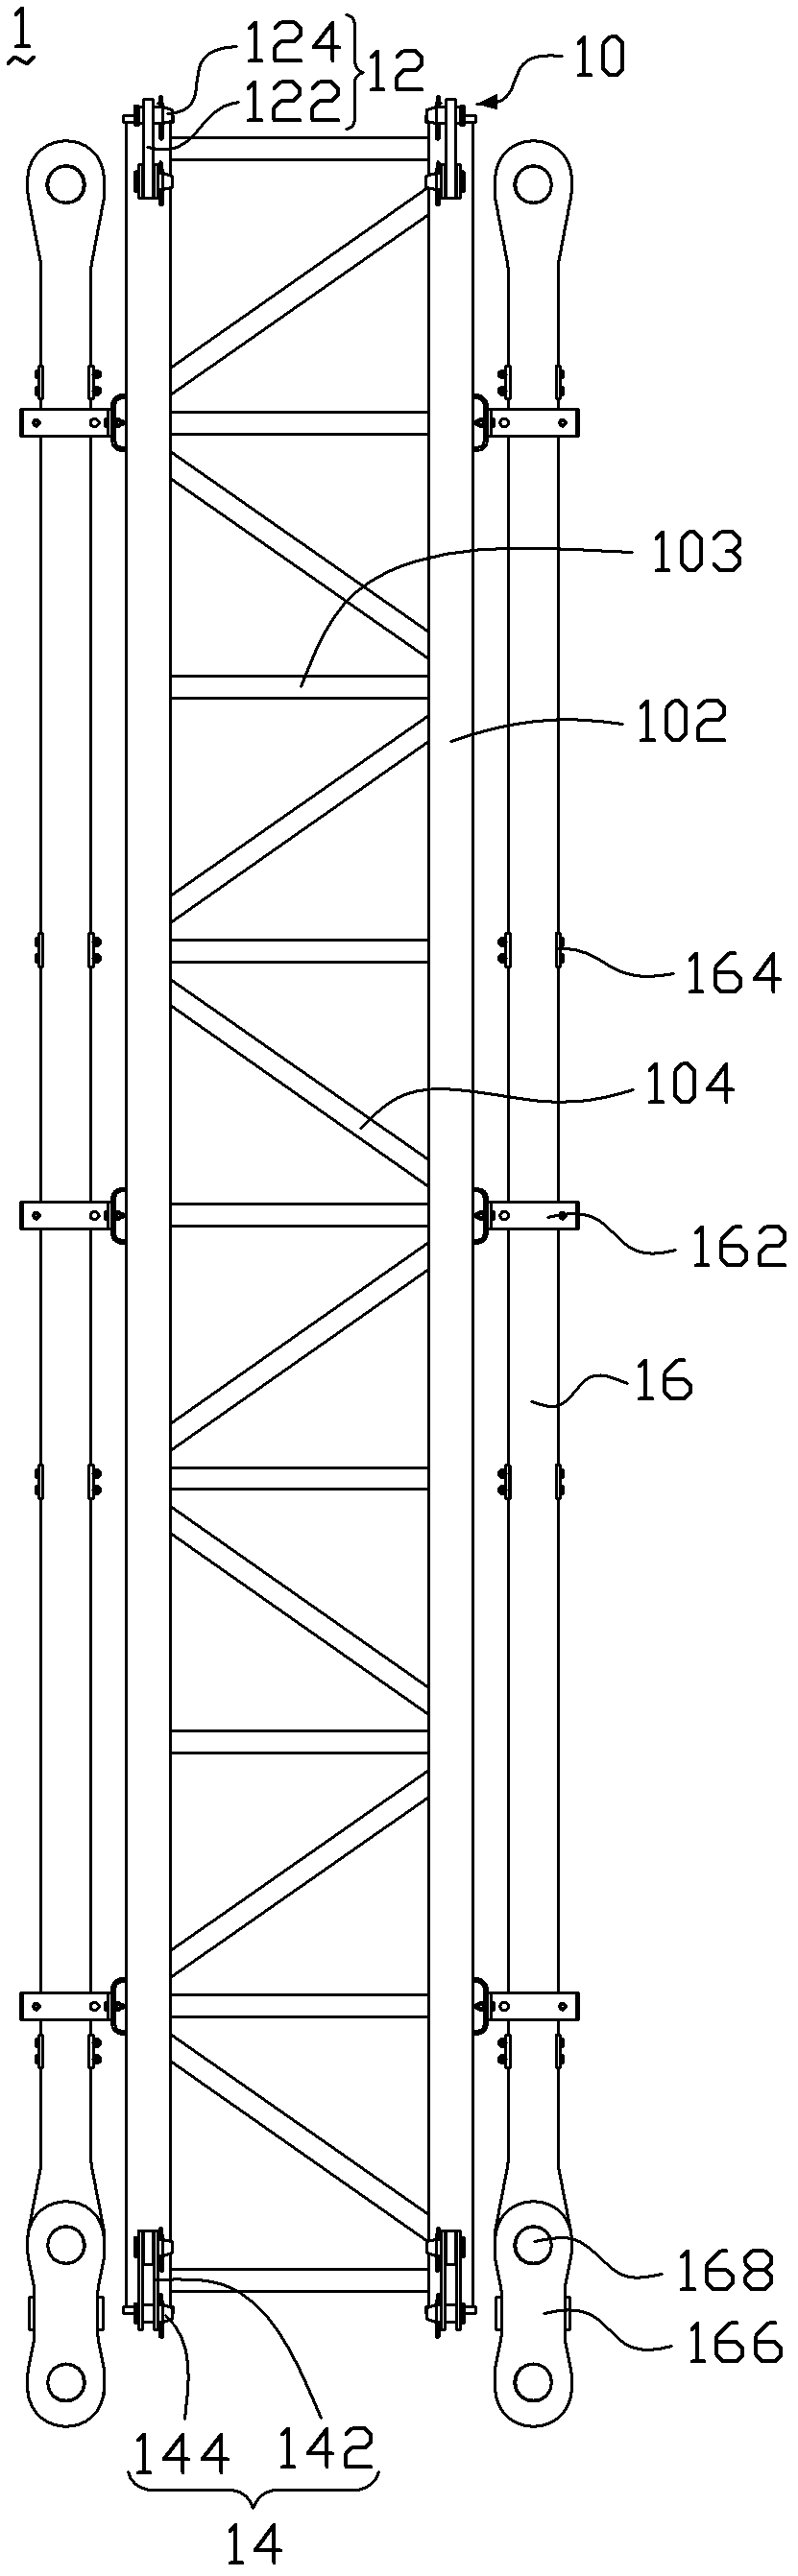 Arm joint for truss arm, truss arm, and crane with truss arm